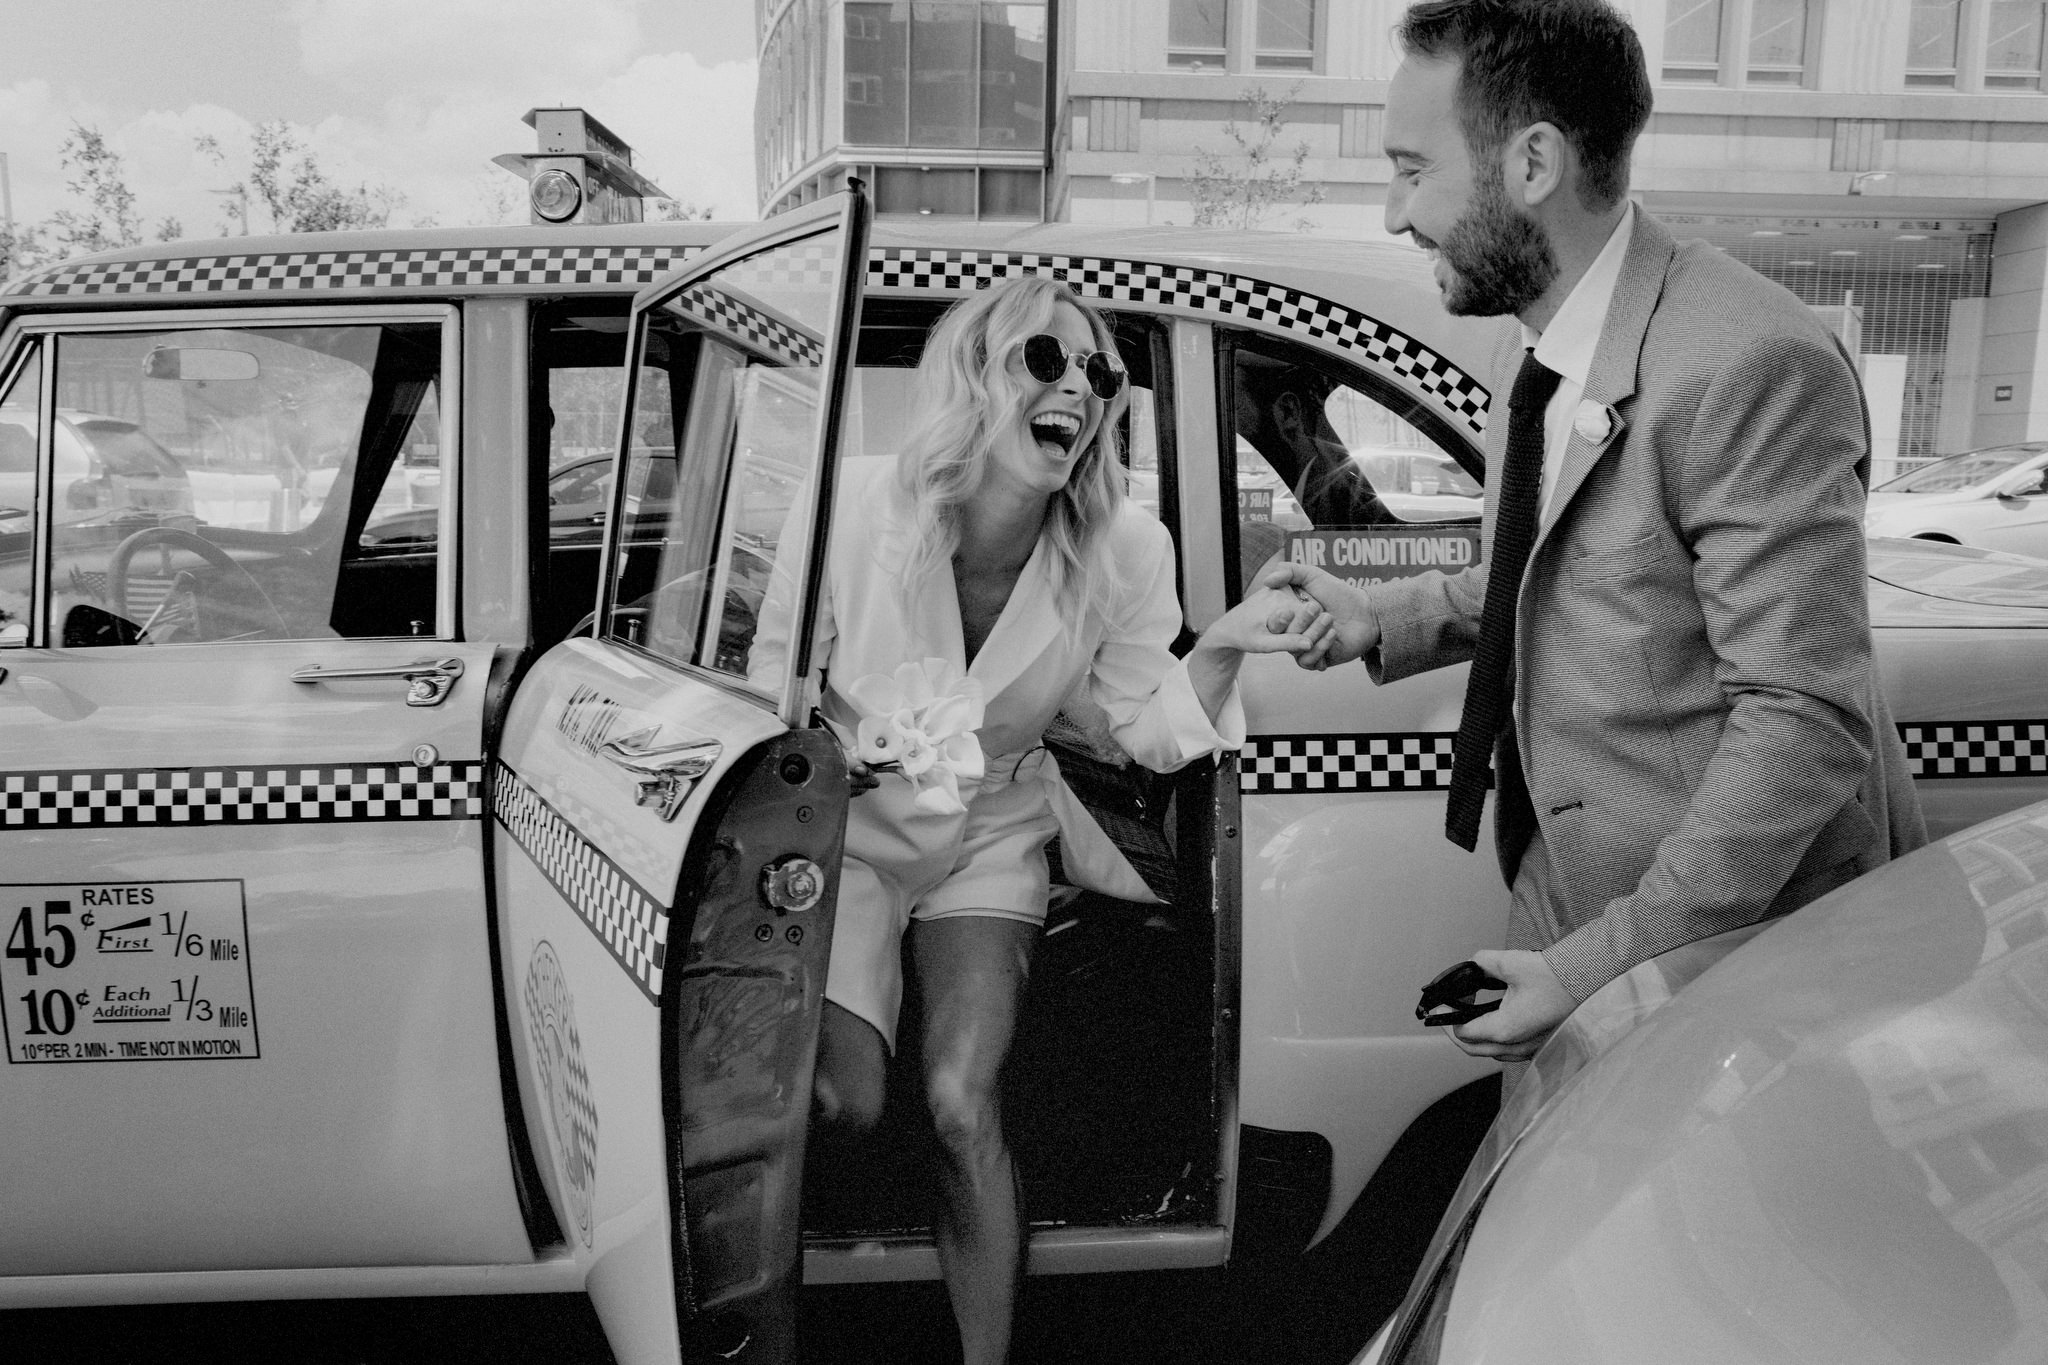 Newly married couple exiting a vintage taxi. Groom helping the bride out of the car with big smiles.